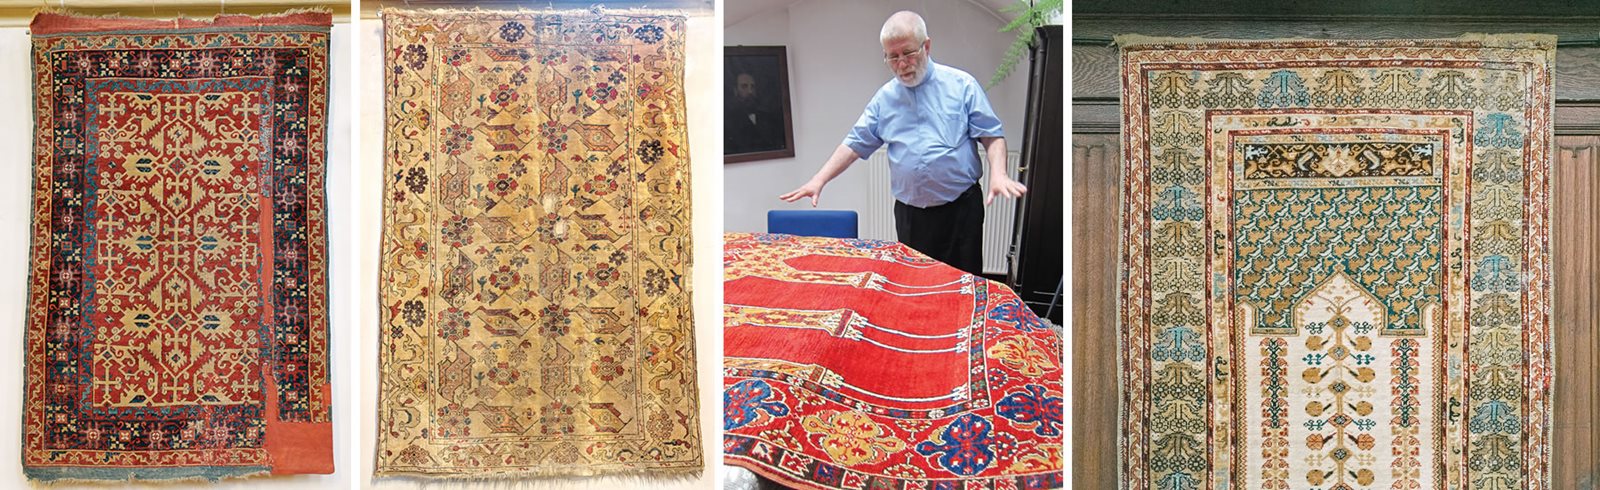 <i>Left to right</i>: A Lotto and a Selendi &ldquo;bird&rdquo; carpet both hang in St. Margaret&rsquo;s Church in Mediaş. In the northern Transylvanian town of Bistriţa, Pastor Hans Dieter Krauss displays a replica of a column carpet. Its original is among 53 Bistriţa carpets taken in 1944 for safekeeping in Nuremberg, where they await return for secure display in their home country. A Kula prayer rug with floral arabesques and a decorated trellis in the Black Church.